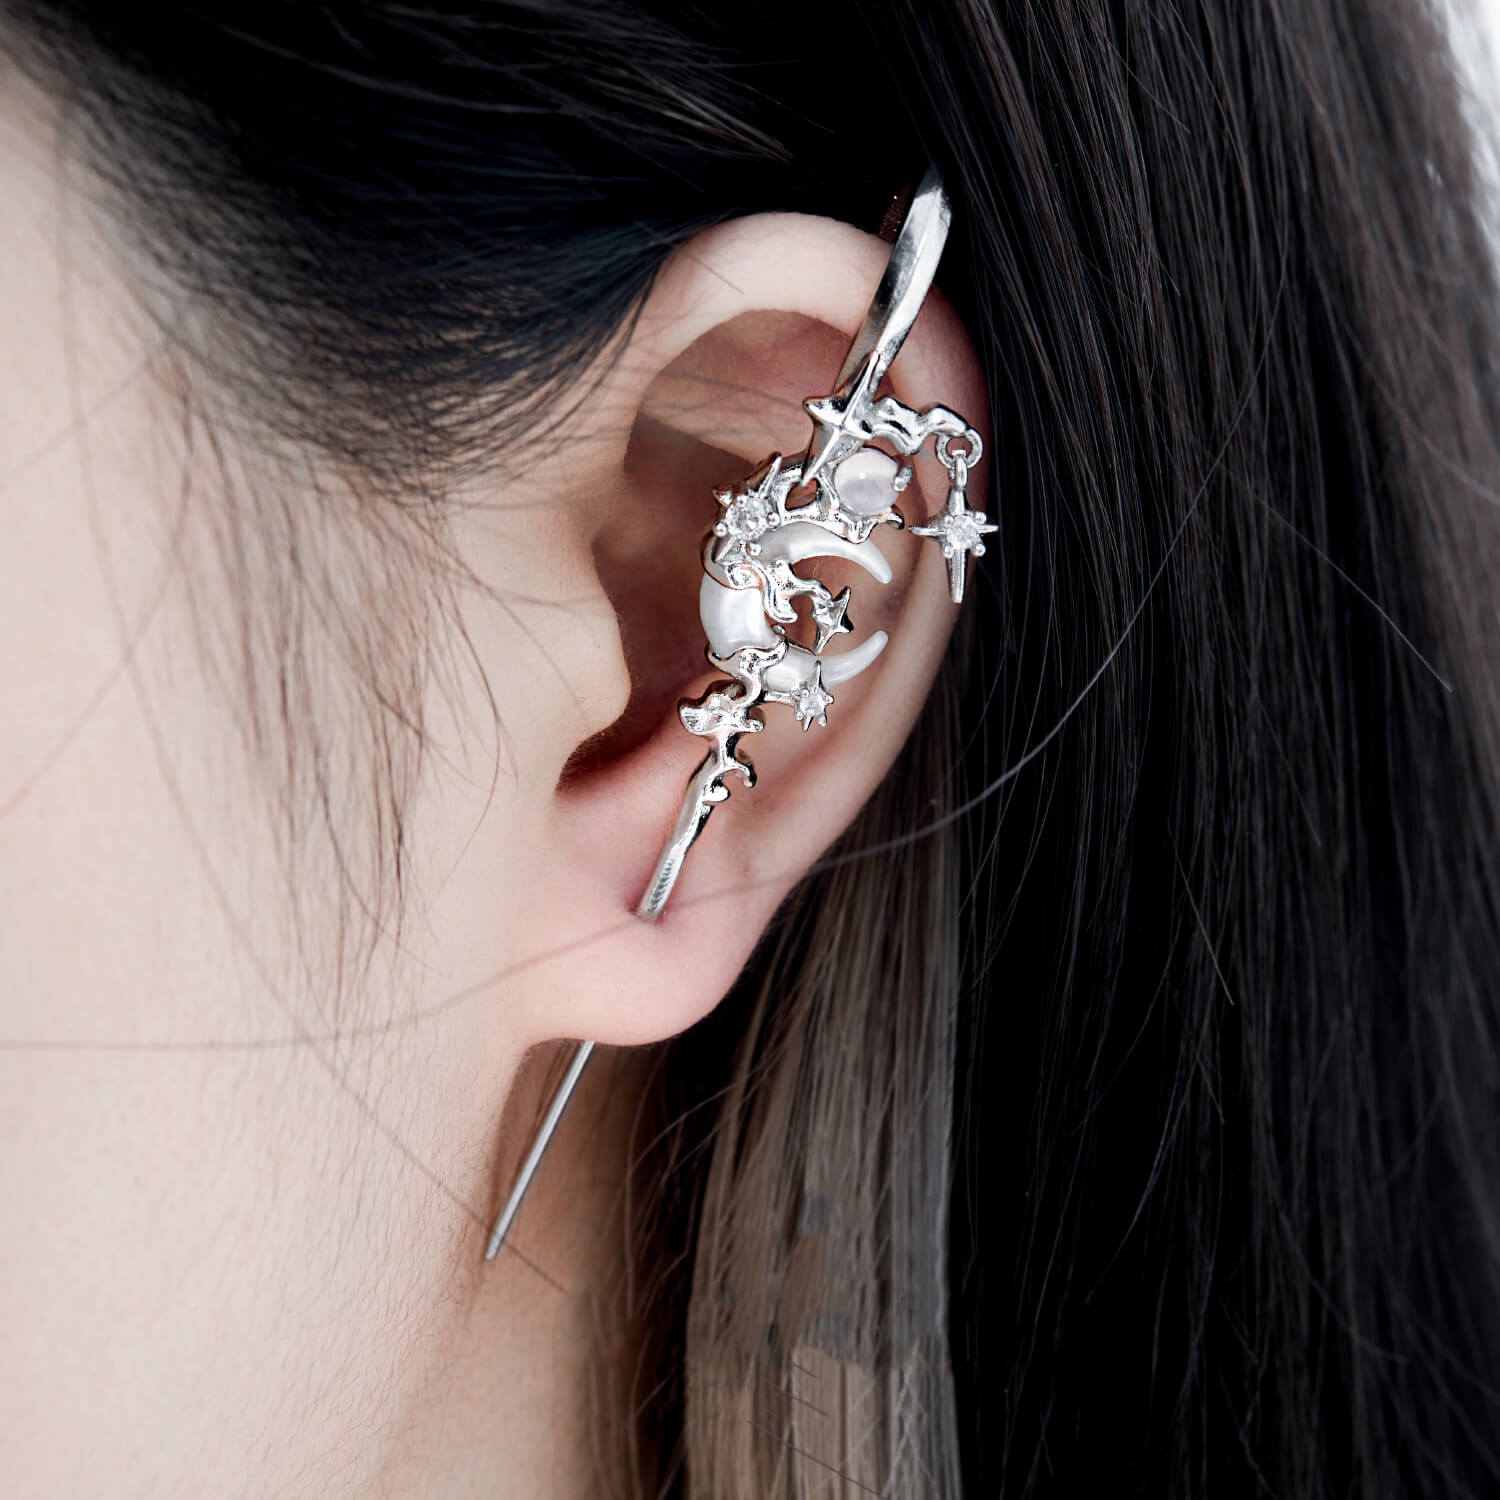 16g 20g Daisy cartilage ear stud, Flower earring, Resin, 316l surgical  steel, Sold as piece - Hi Unni